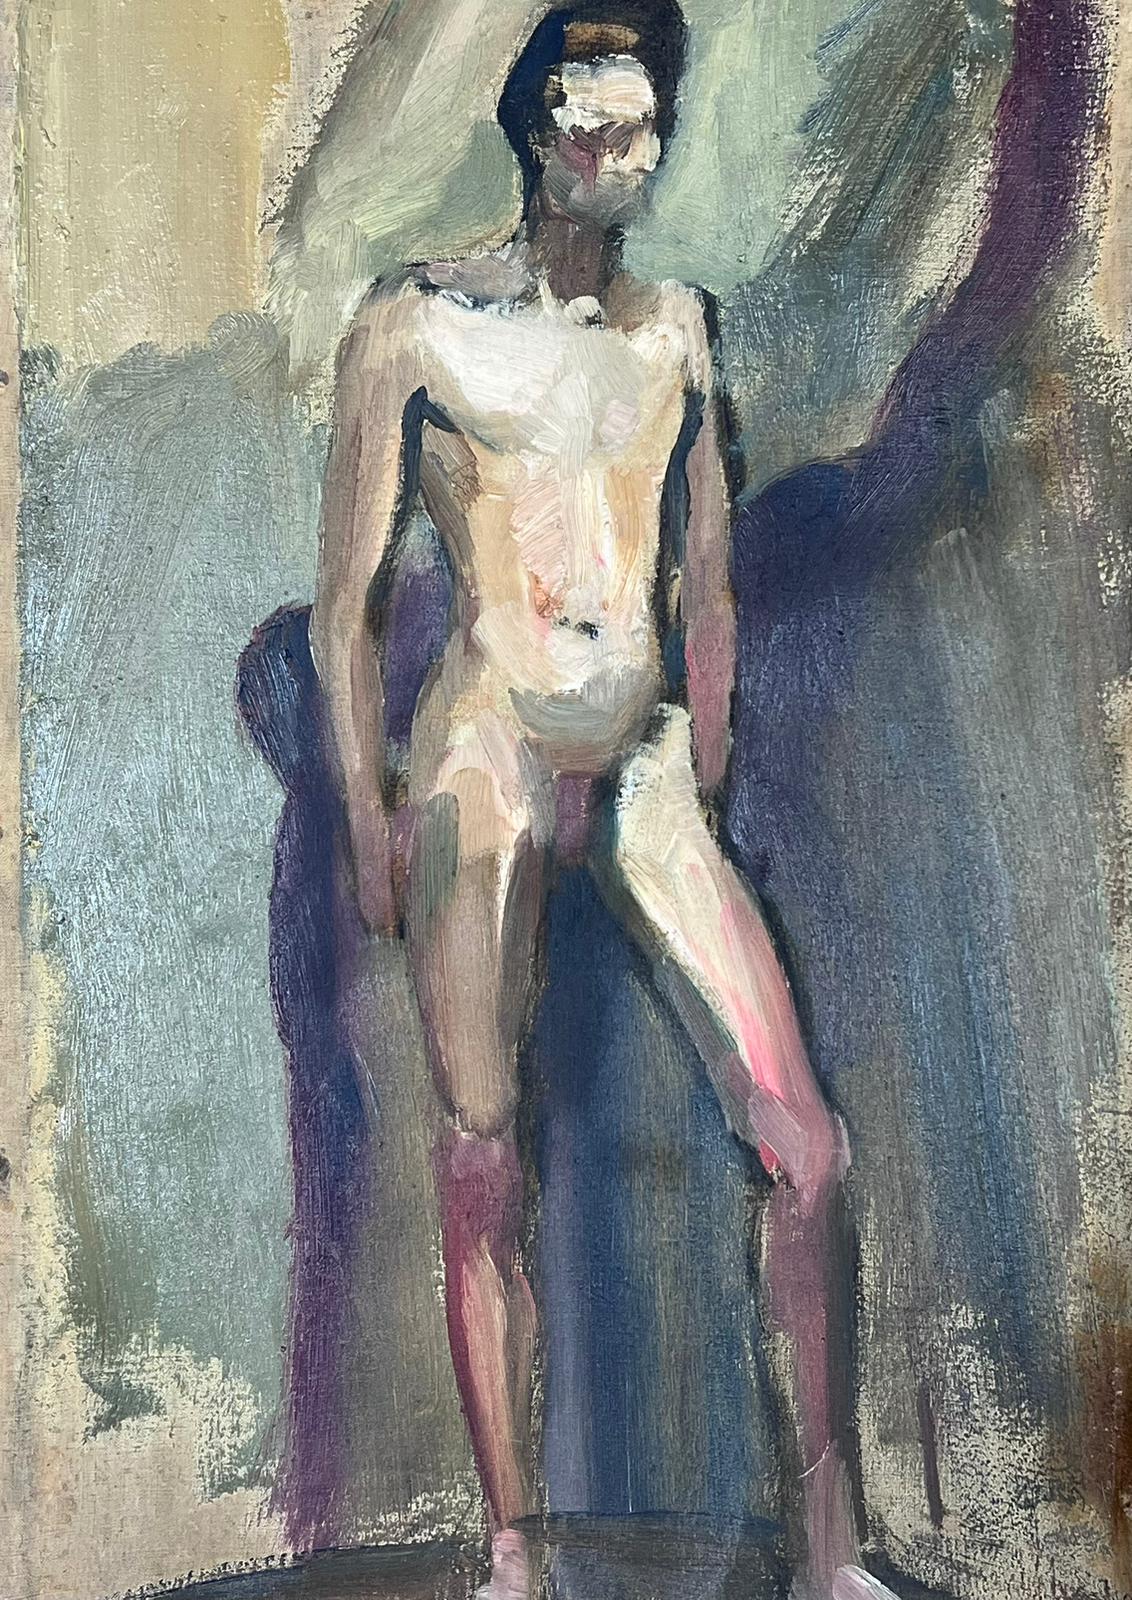 Nude Painting Josine Vignon - 1950s French Post Impressionist Signed Nude Man Artists Posed Model 